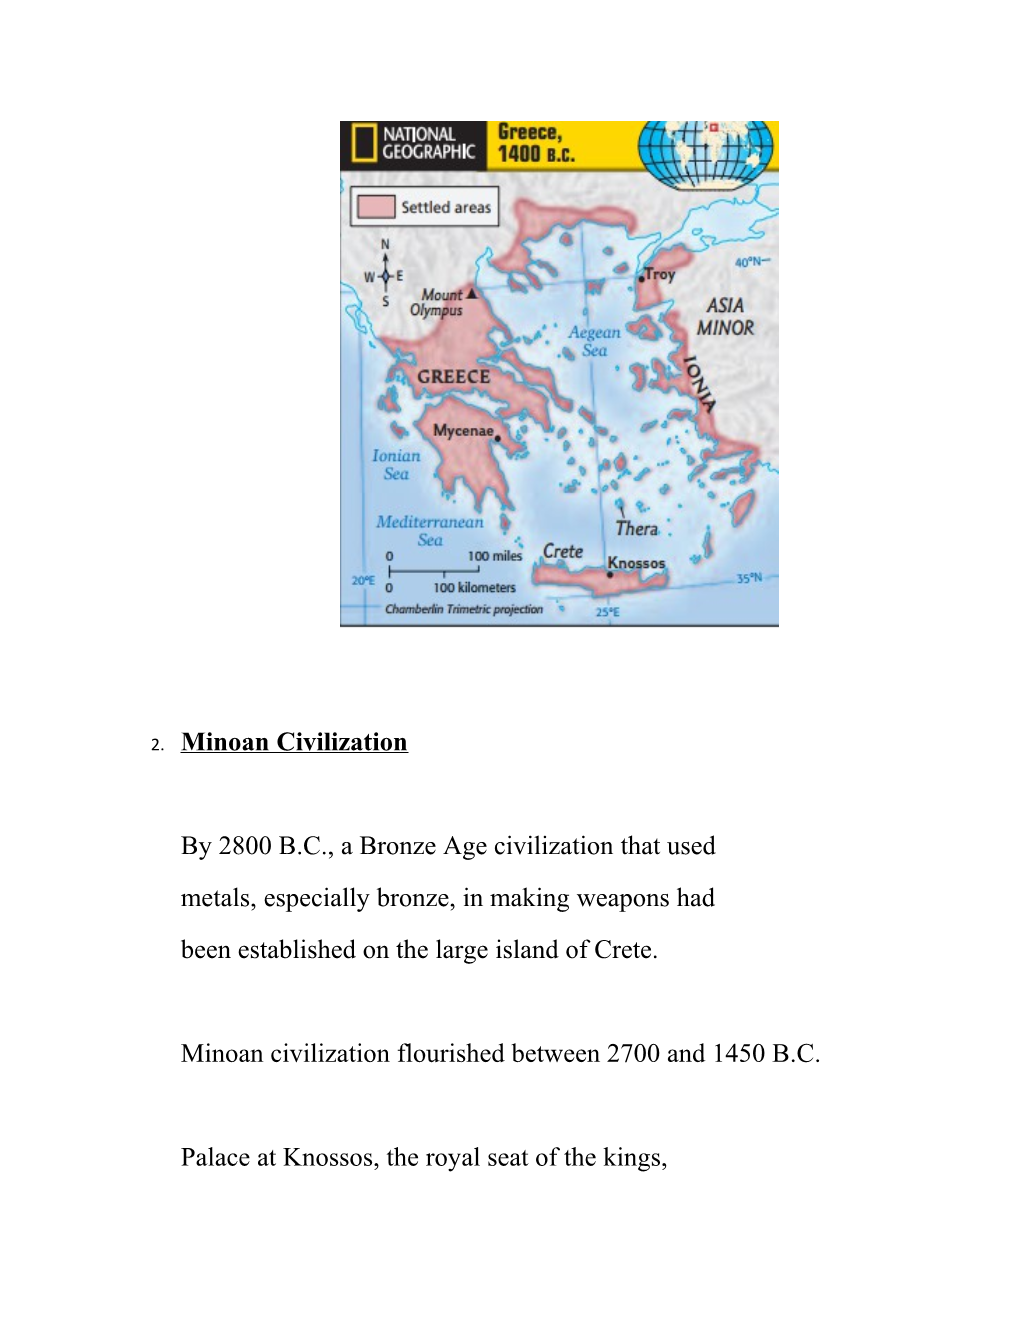 Section 1: the First Greek Civilizations